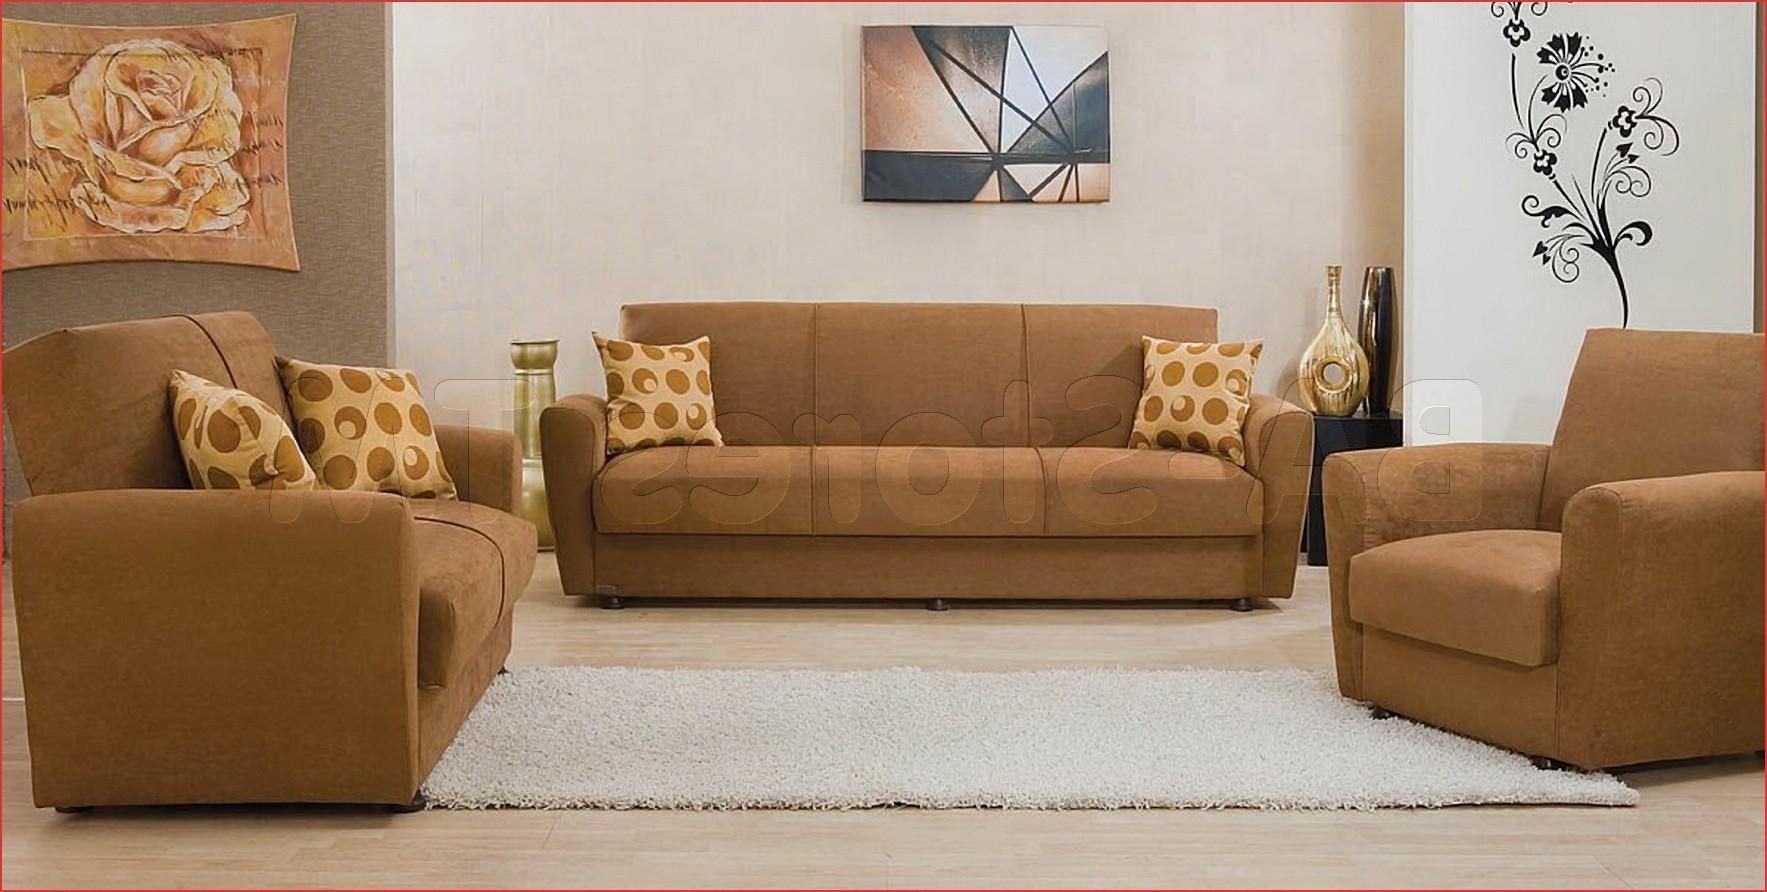 Casual Sofas And Chairs Awesome Coaster Casual Sofa Co S – Hkspa Intended For Casual Sofas And Chairs (View 11 of 21)